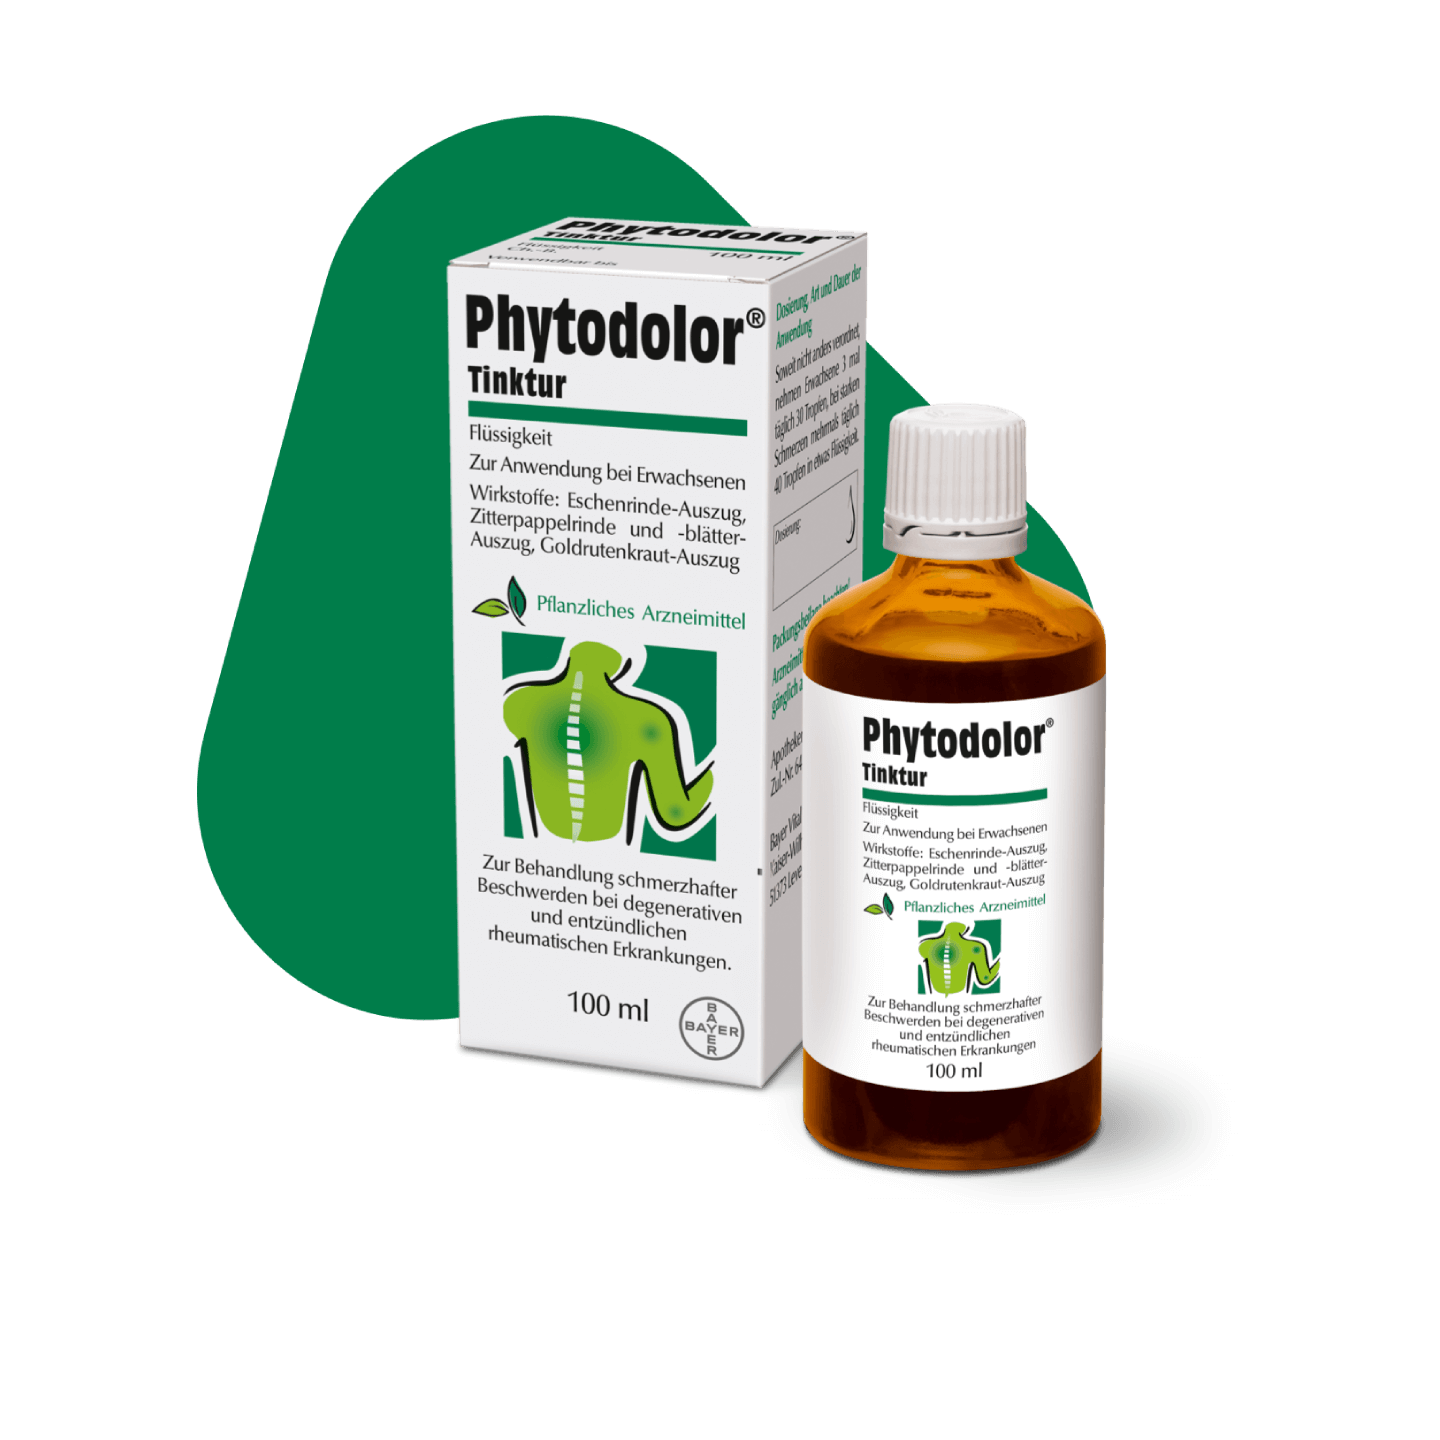 Phytodolor_product001 new